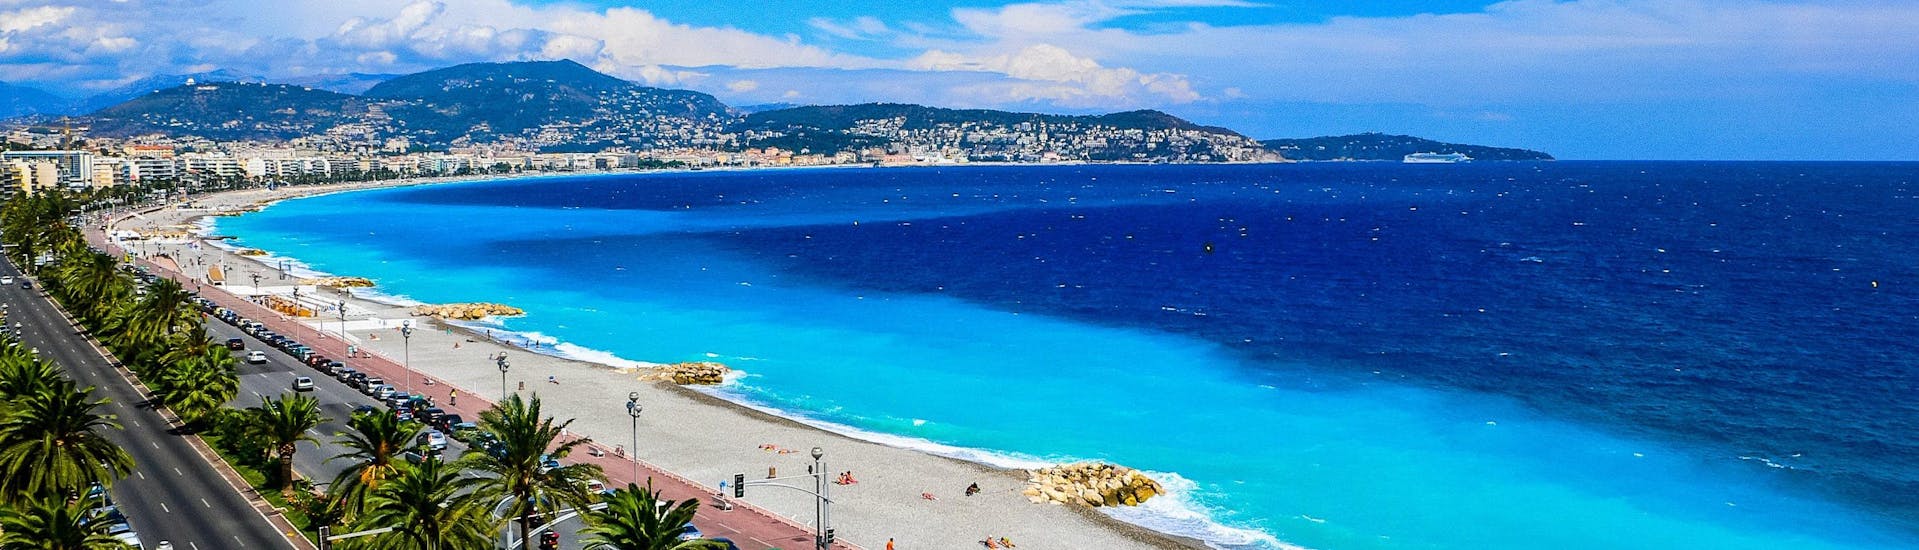 An image of the beautiful beach promenade and the deep blue waters of the Côte d'Azur you get to see when riding a jet ski or doing other water sports activities in Nice.